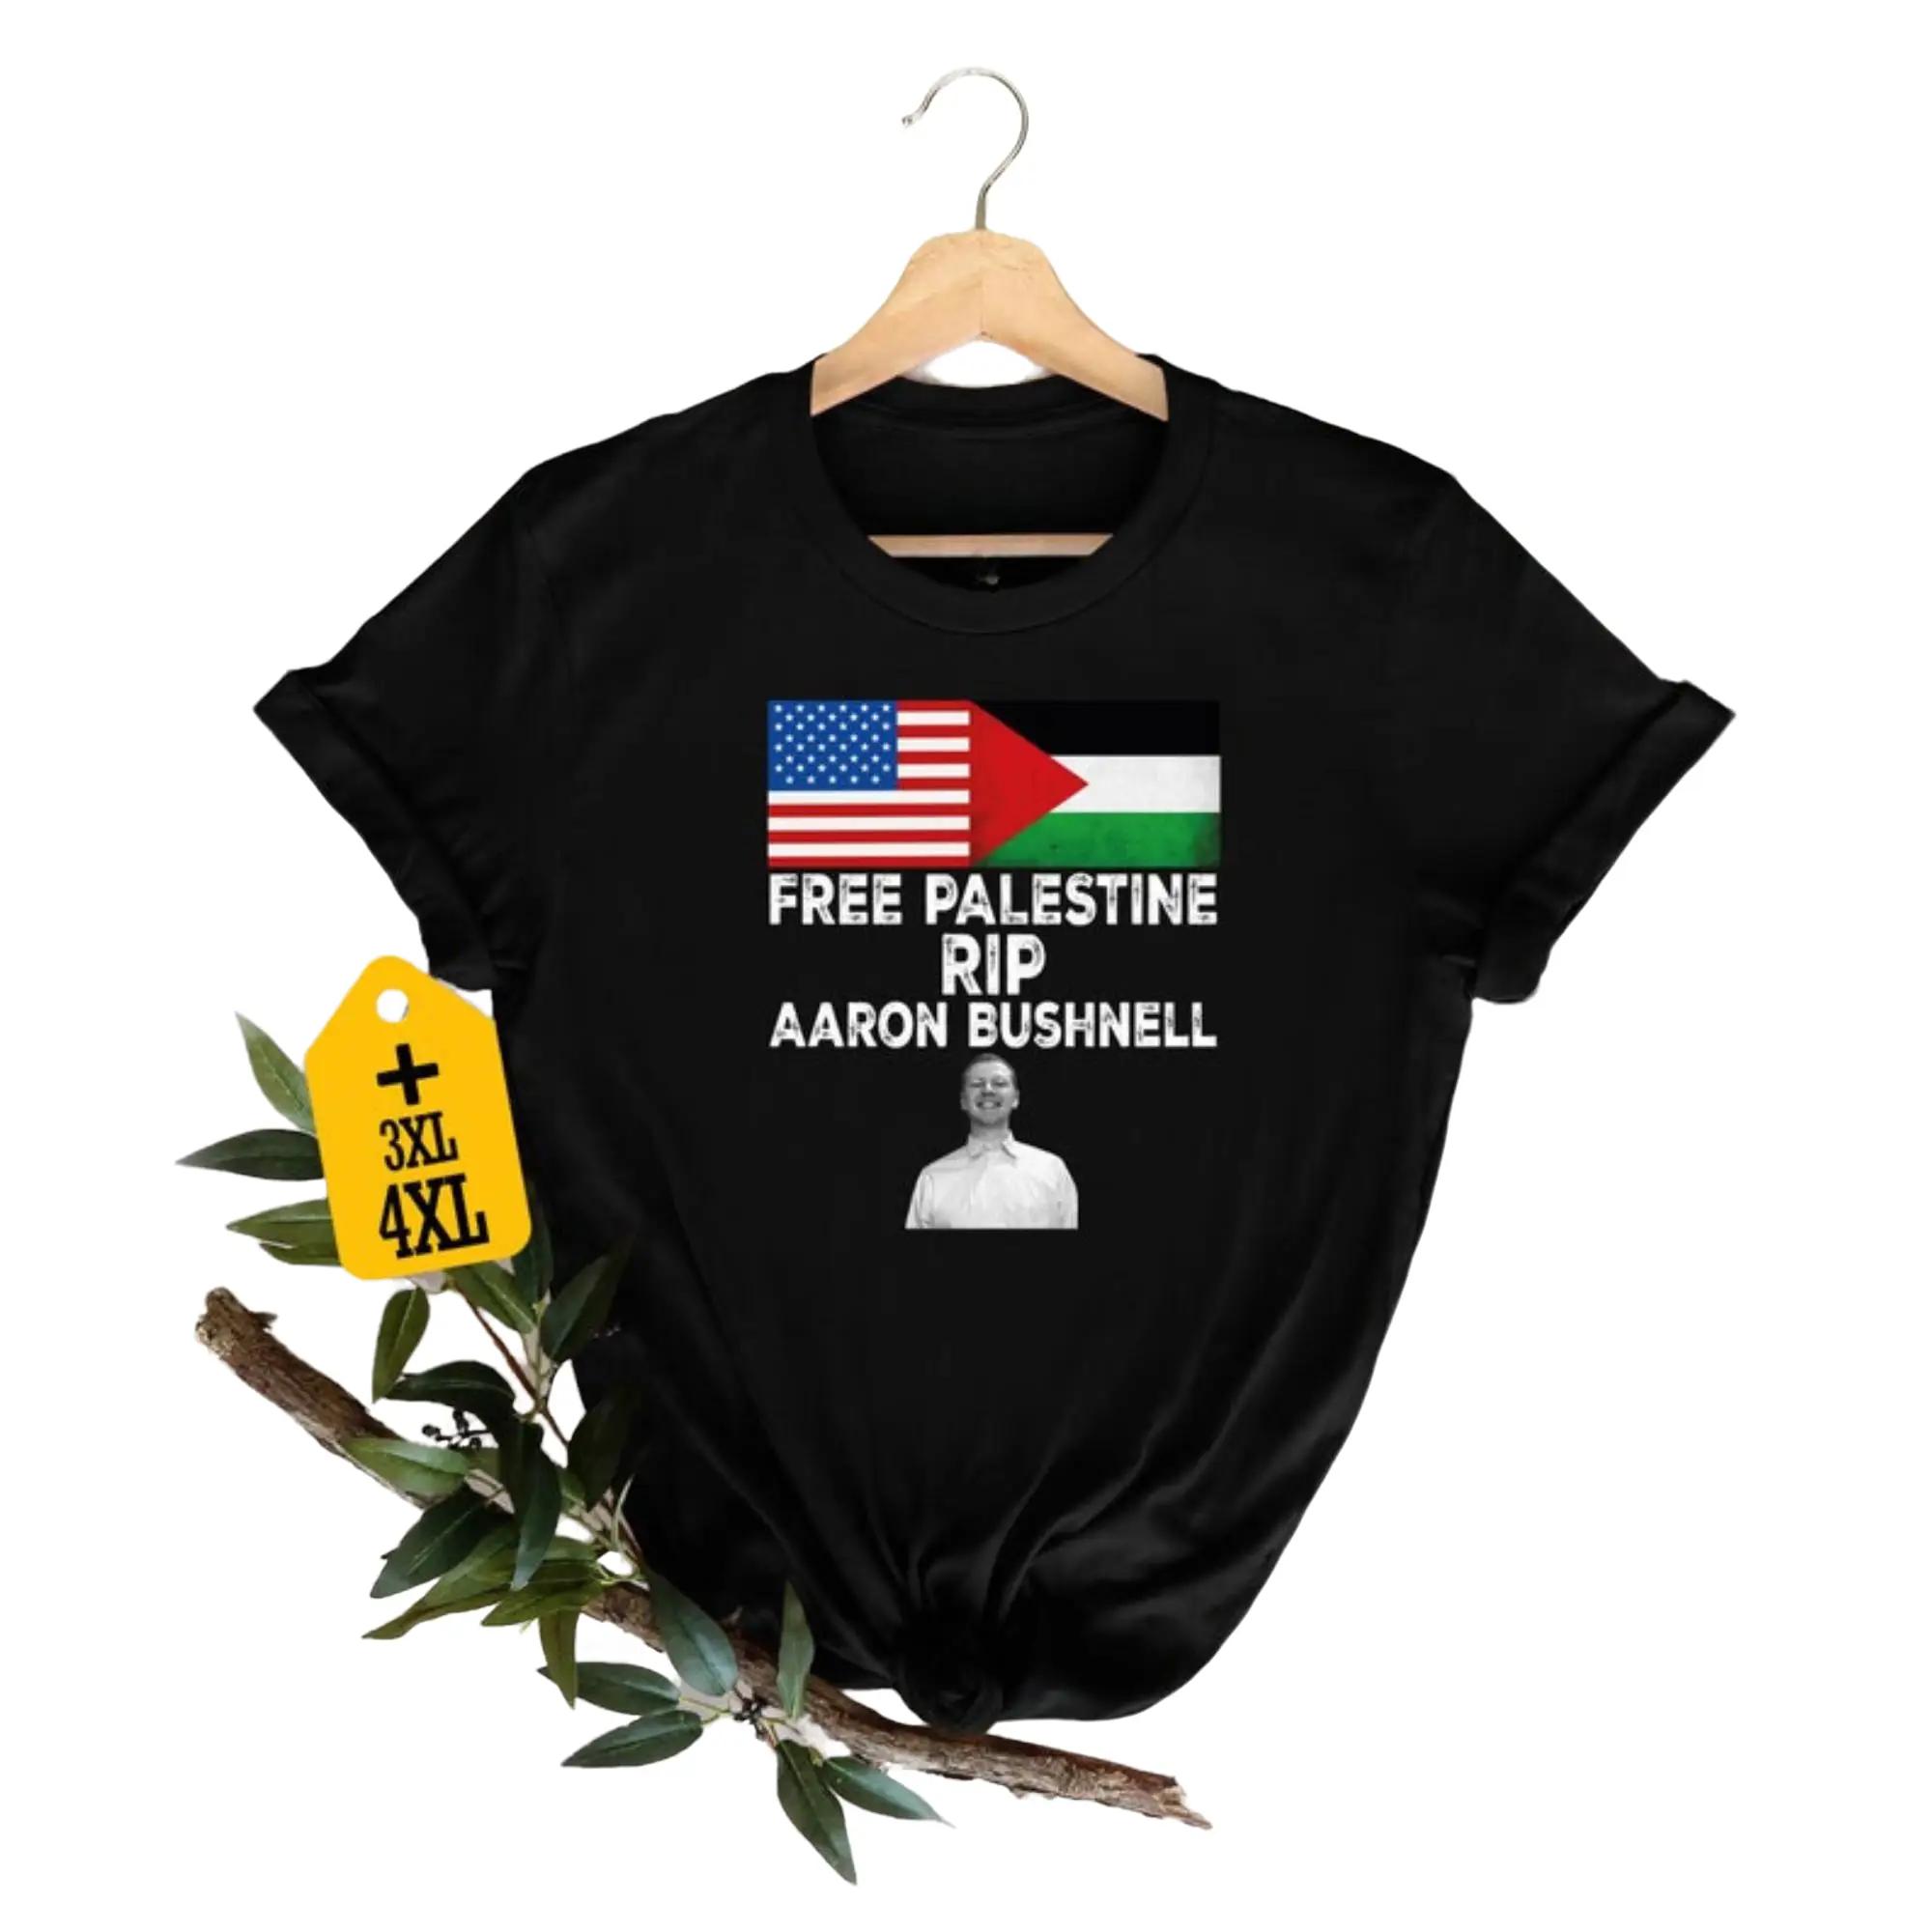 Free Palestine Rip Aaron Bushnell Shirt, Rip Aaron Bushnell Free Palestine Shirt, Liberation Shirt, Resistance Until Reclamation Shirt, Support Palestine Shirt, Freedom Shirt, Unisex Shirt, Cotton, All Size